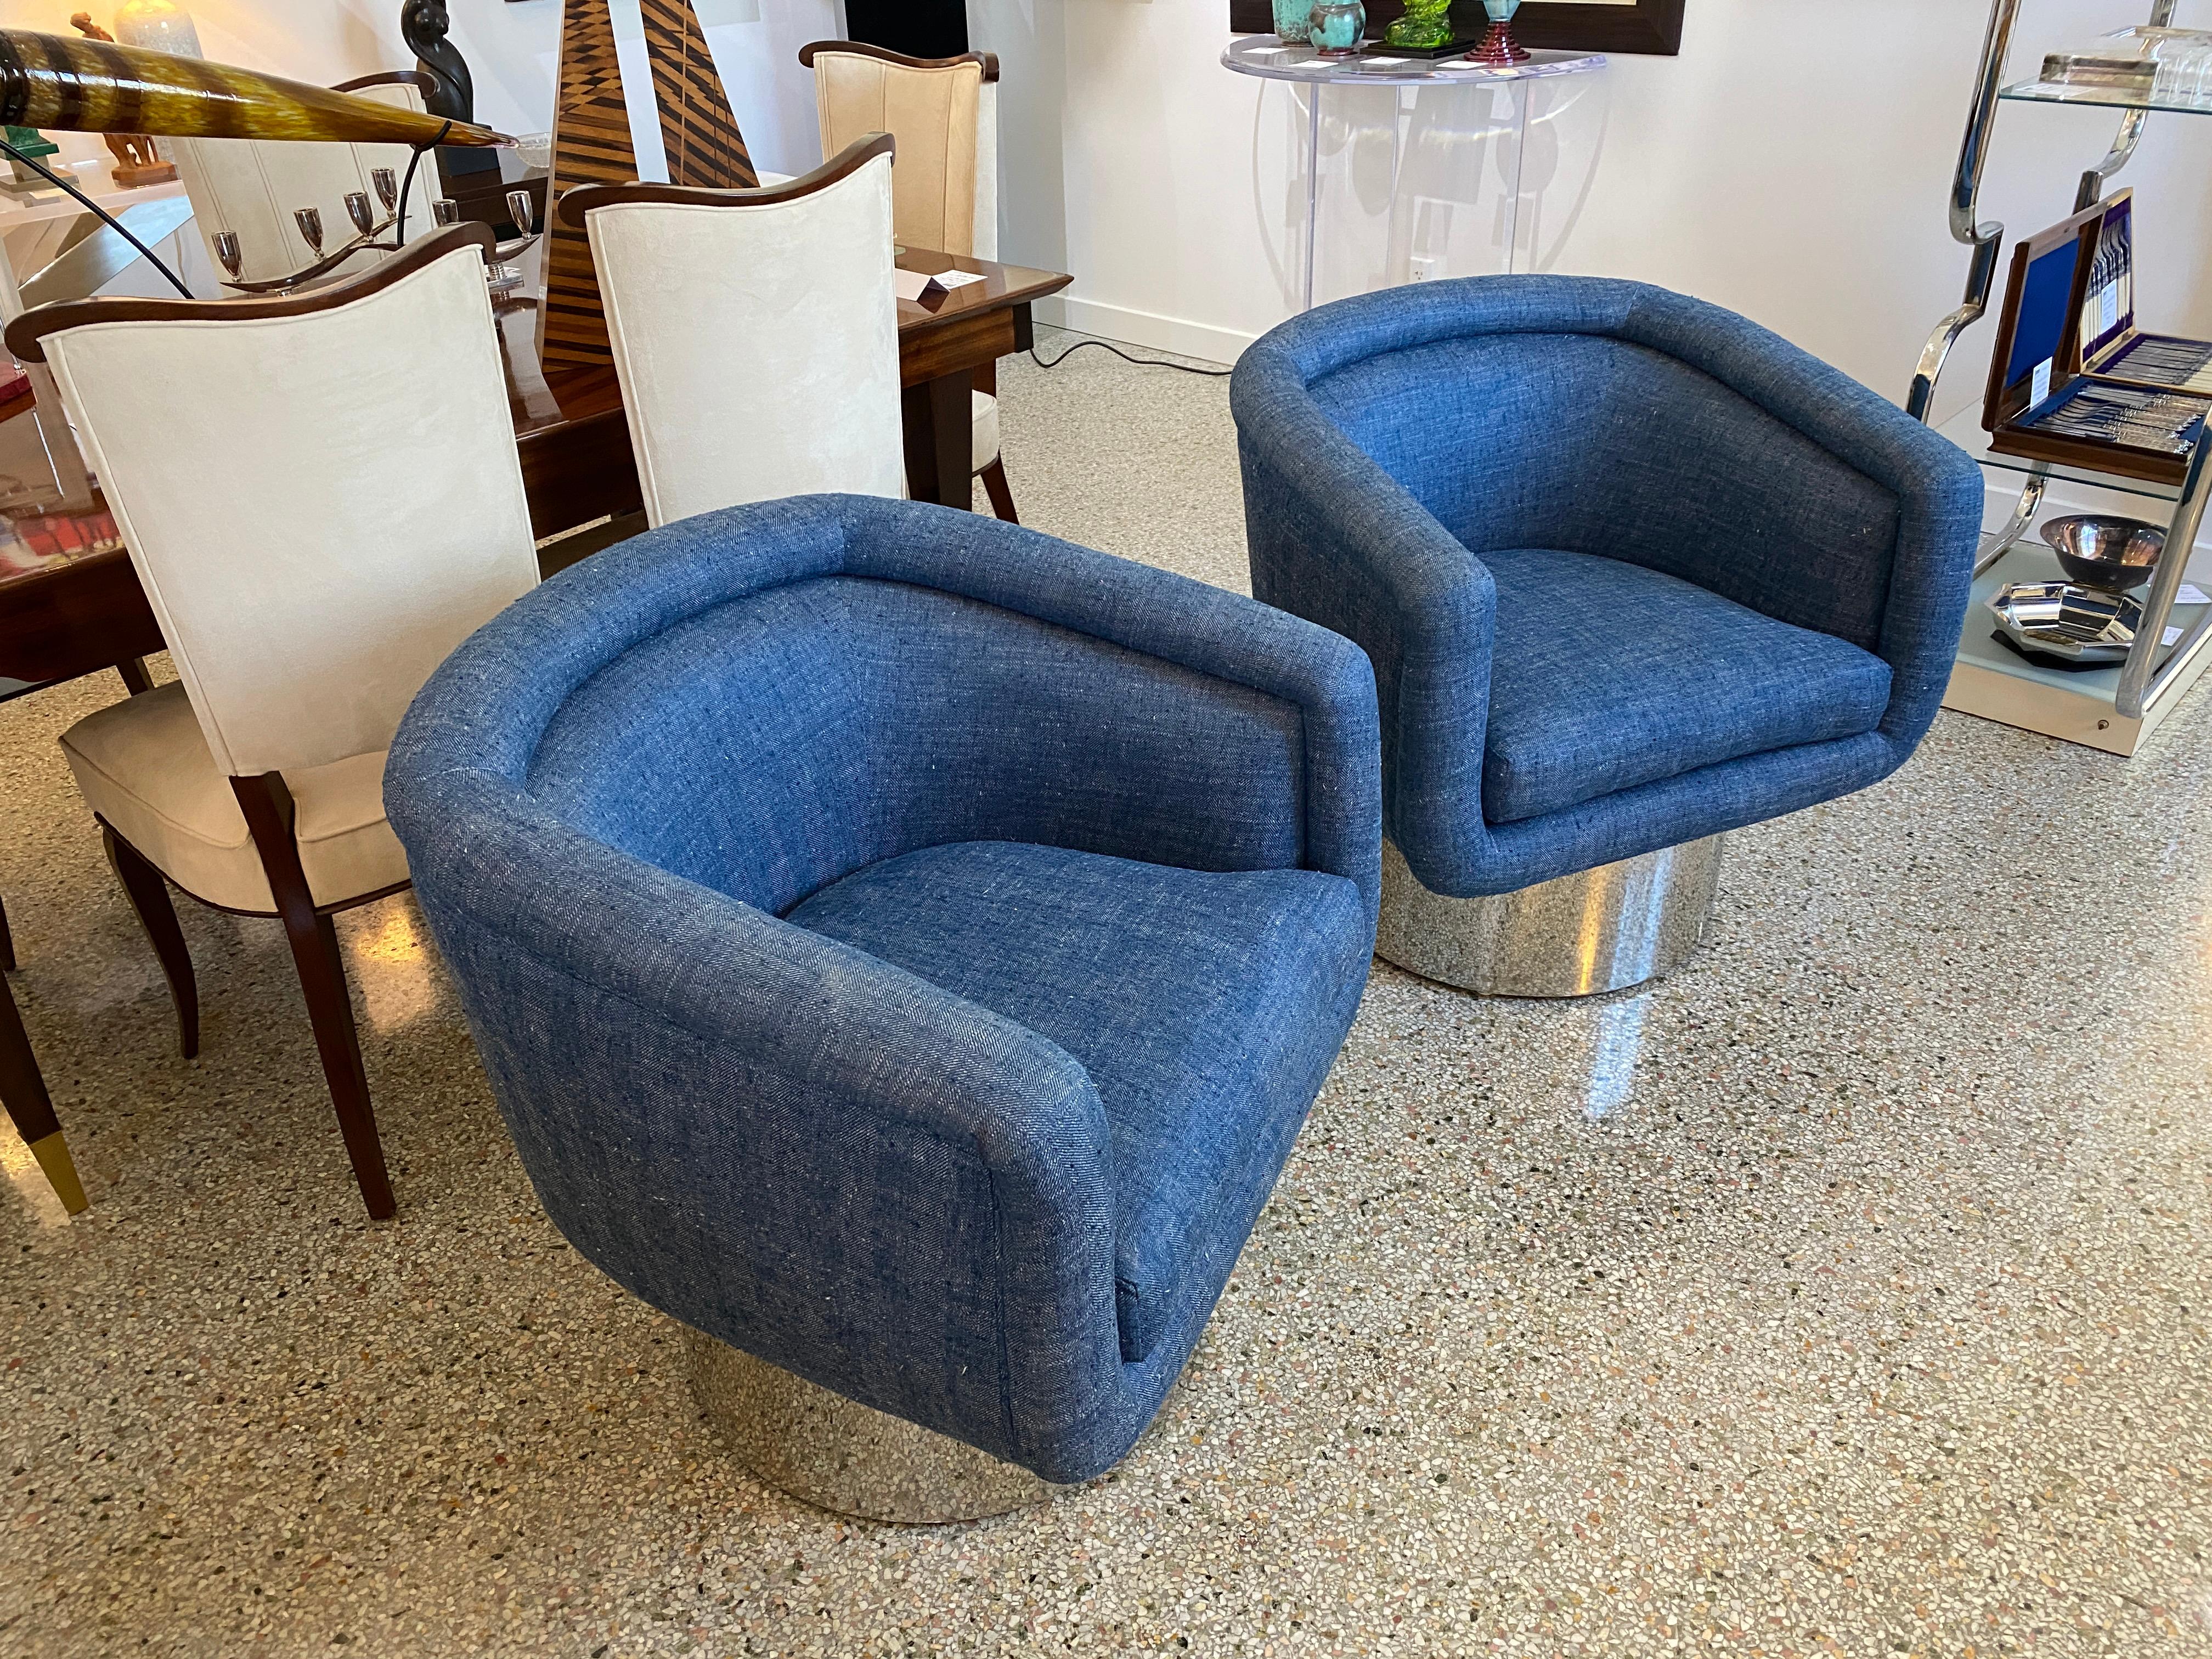 This stylish pair of memory-swivel chairs date to the 1970s-1980s and were designed by Leon Rosen for the Pace Furniture Company. The fabric is a woven texture in blue with soft white warp yarn.